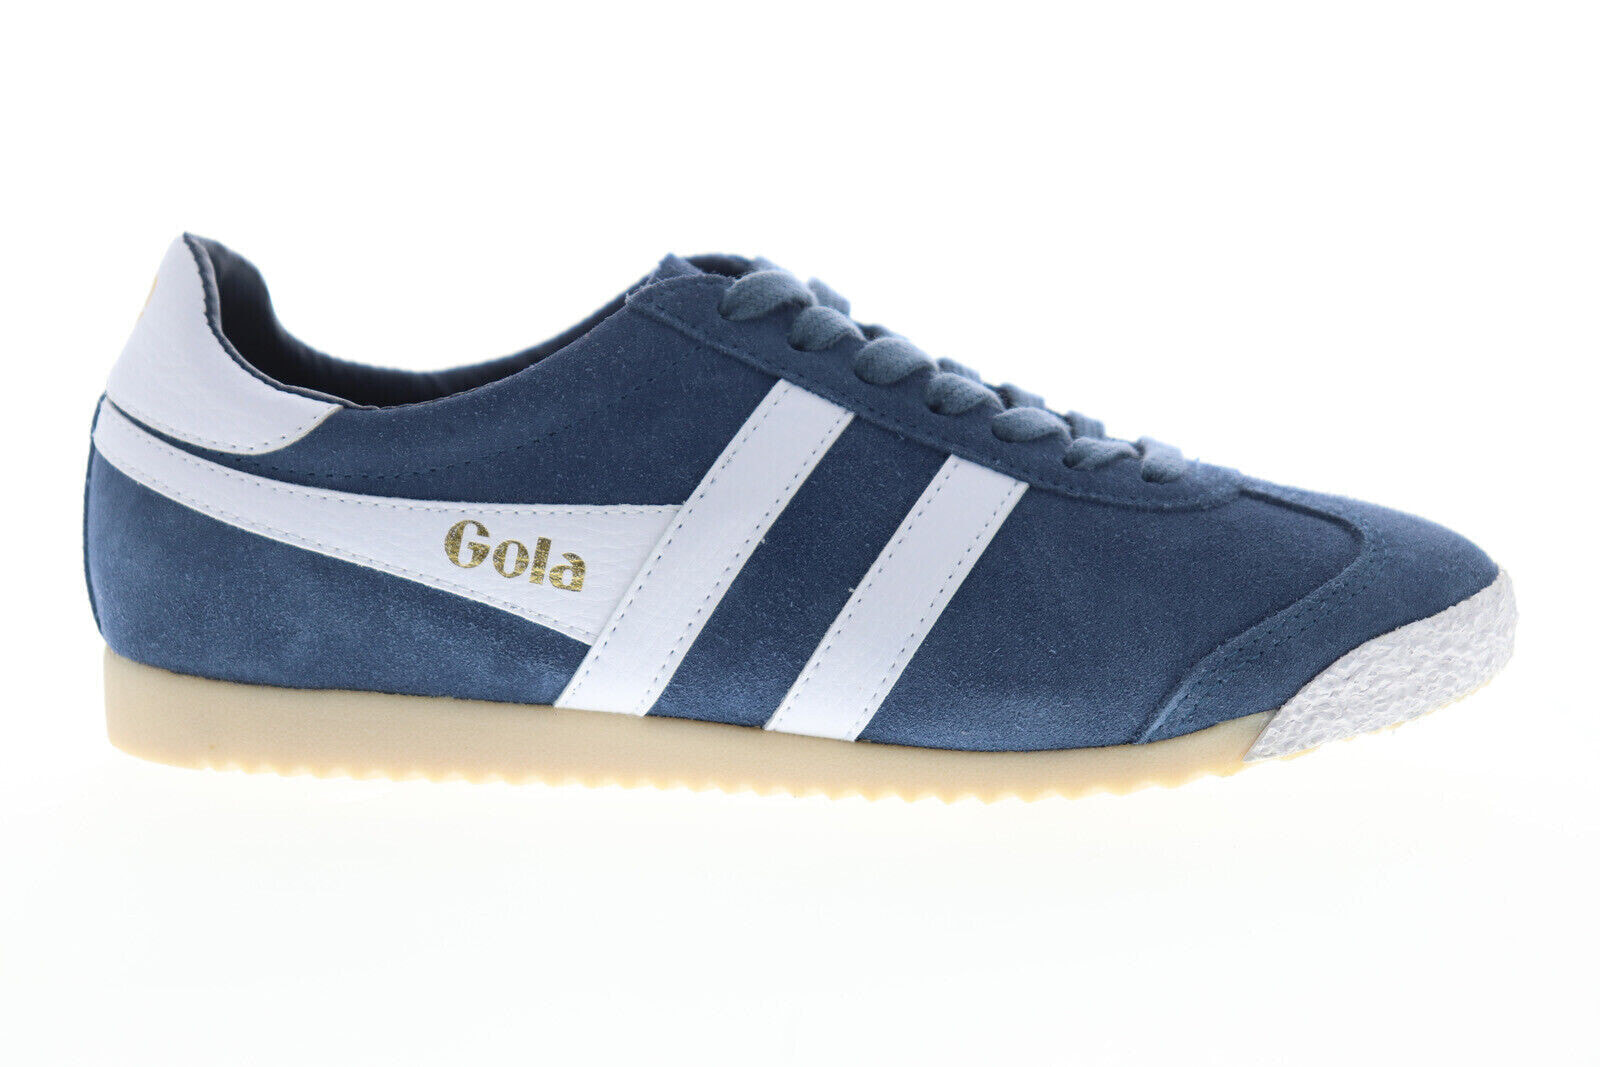 Gola Harrier 50 Suede CMA501 Mens Blue Suede Lifestyle Sneakers Shoes